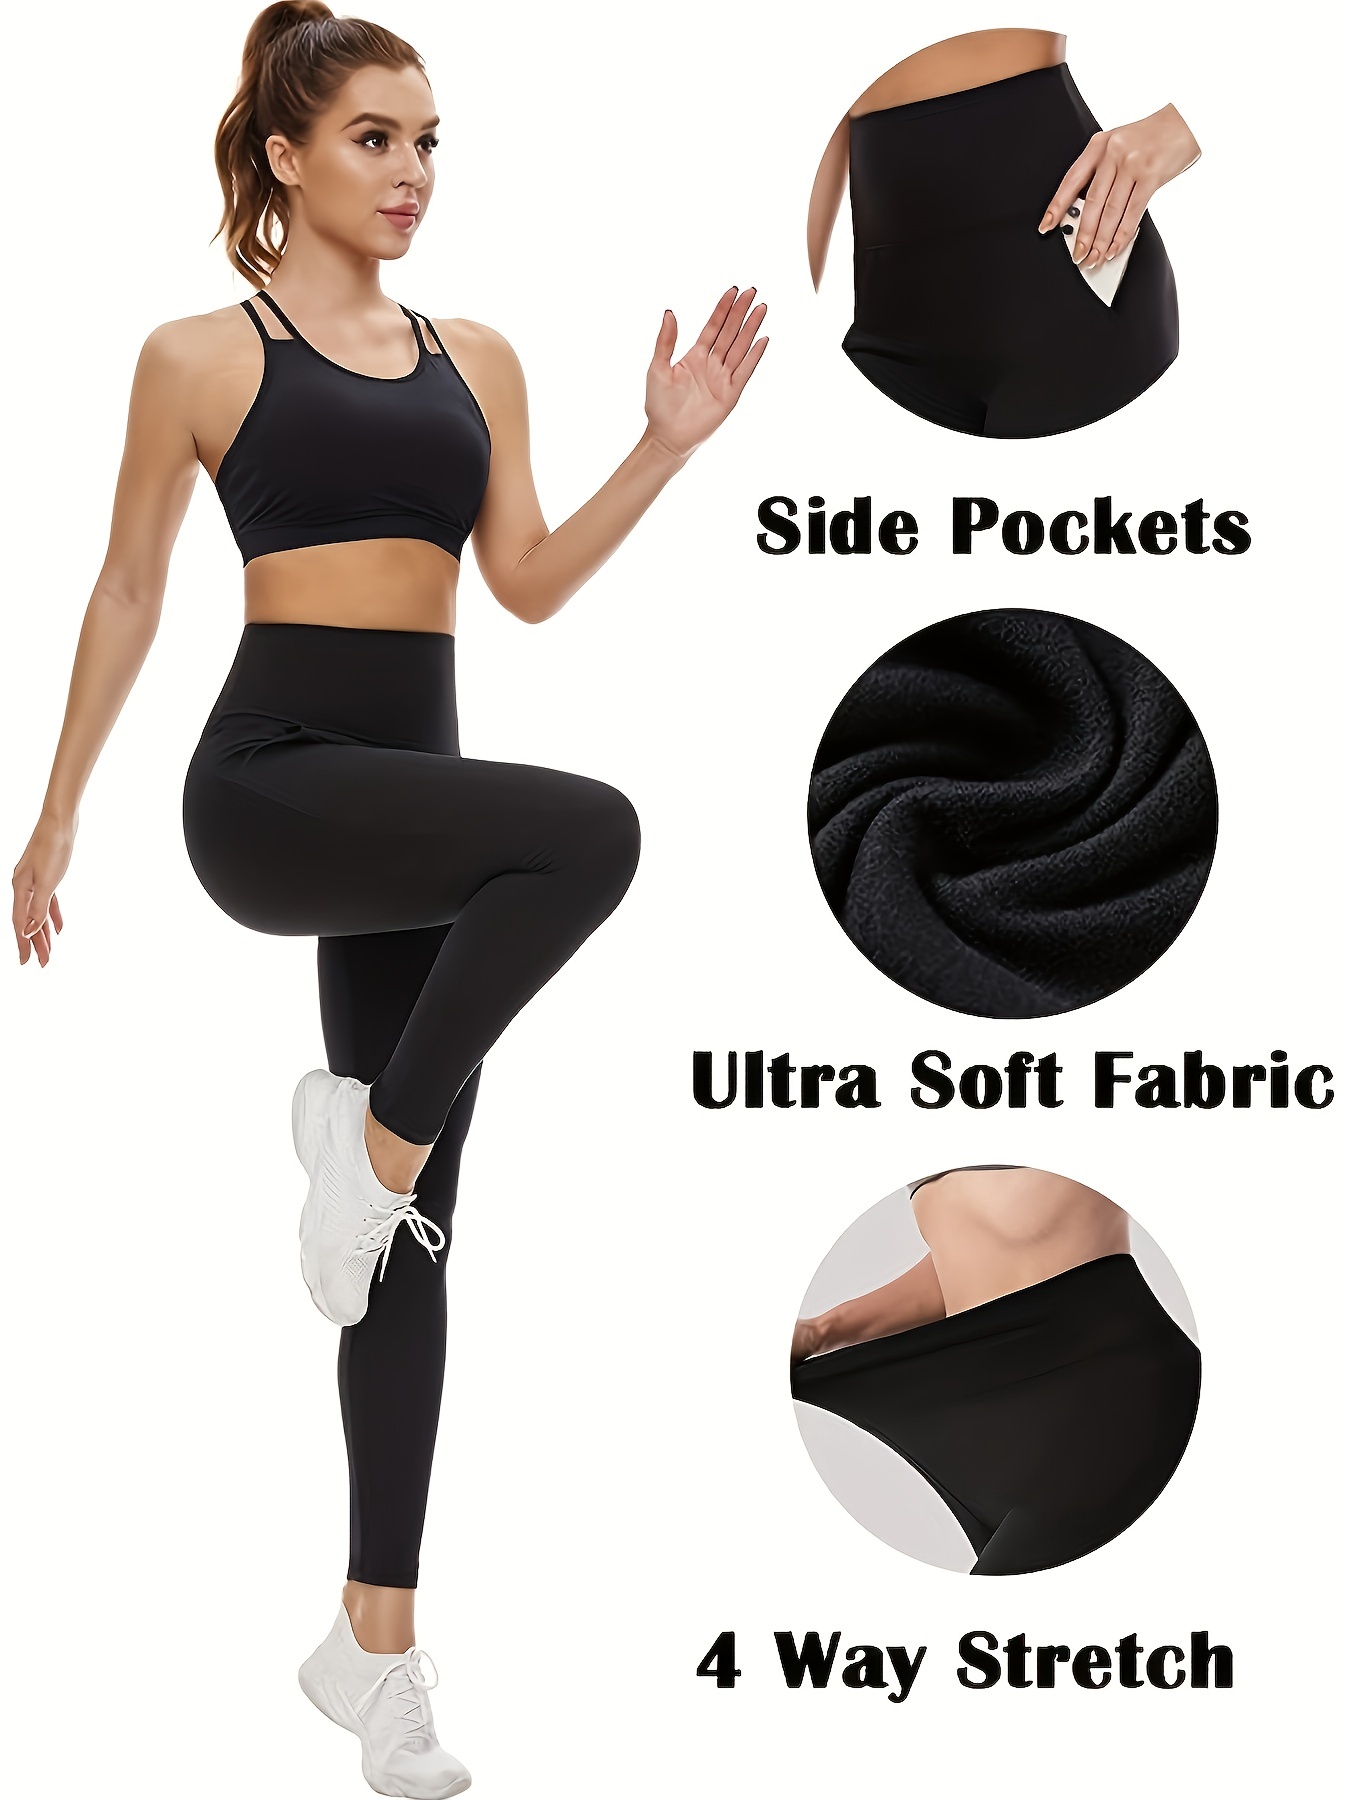 Tummy Tight Yoga Pants With Side Pockets, Sports Pants For